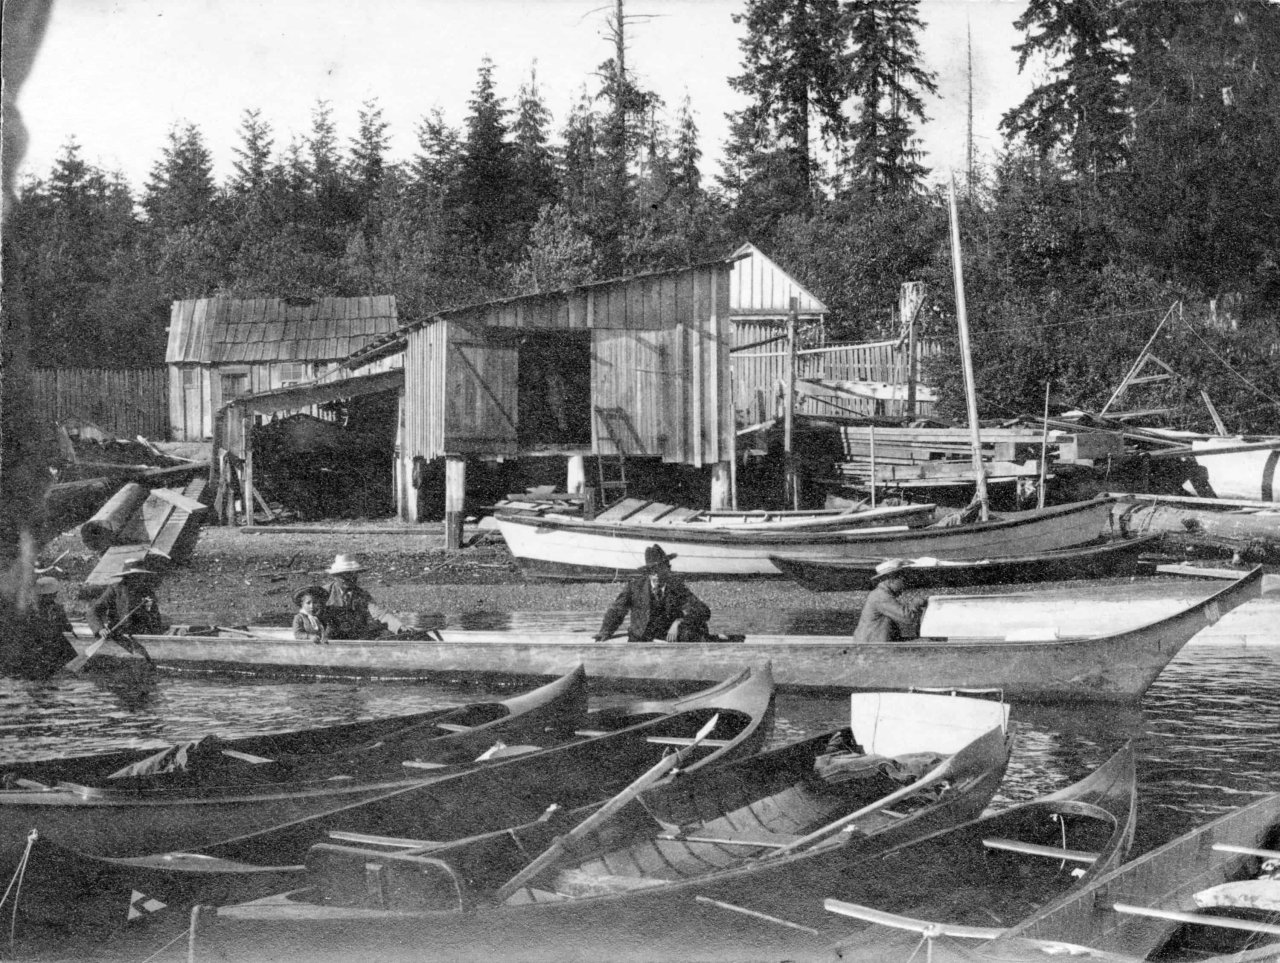 Source: City of Vancouver Archives Item: cva 371-2196 – [Canoes and a boathouse at Brockton Point]